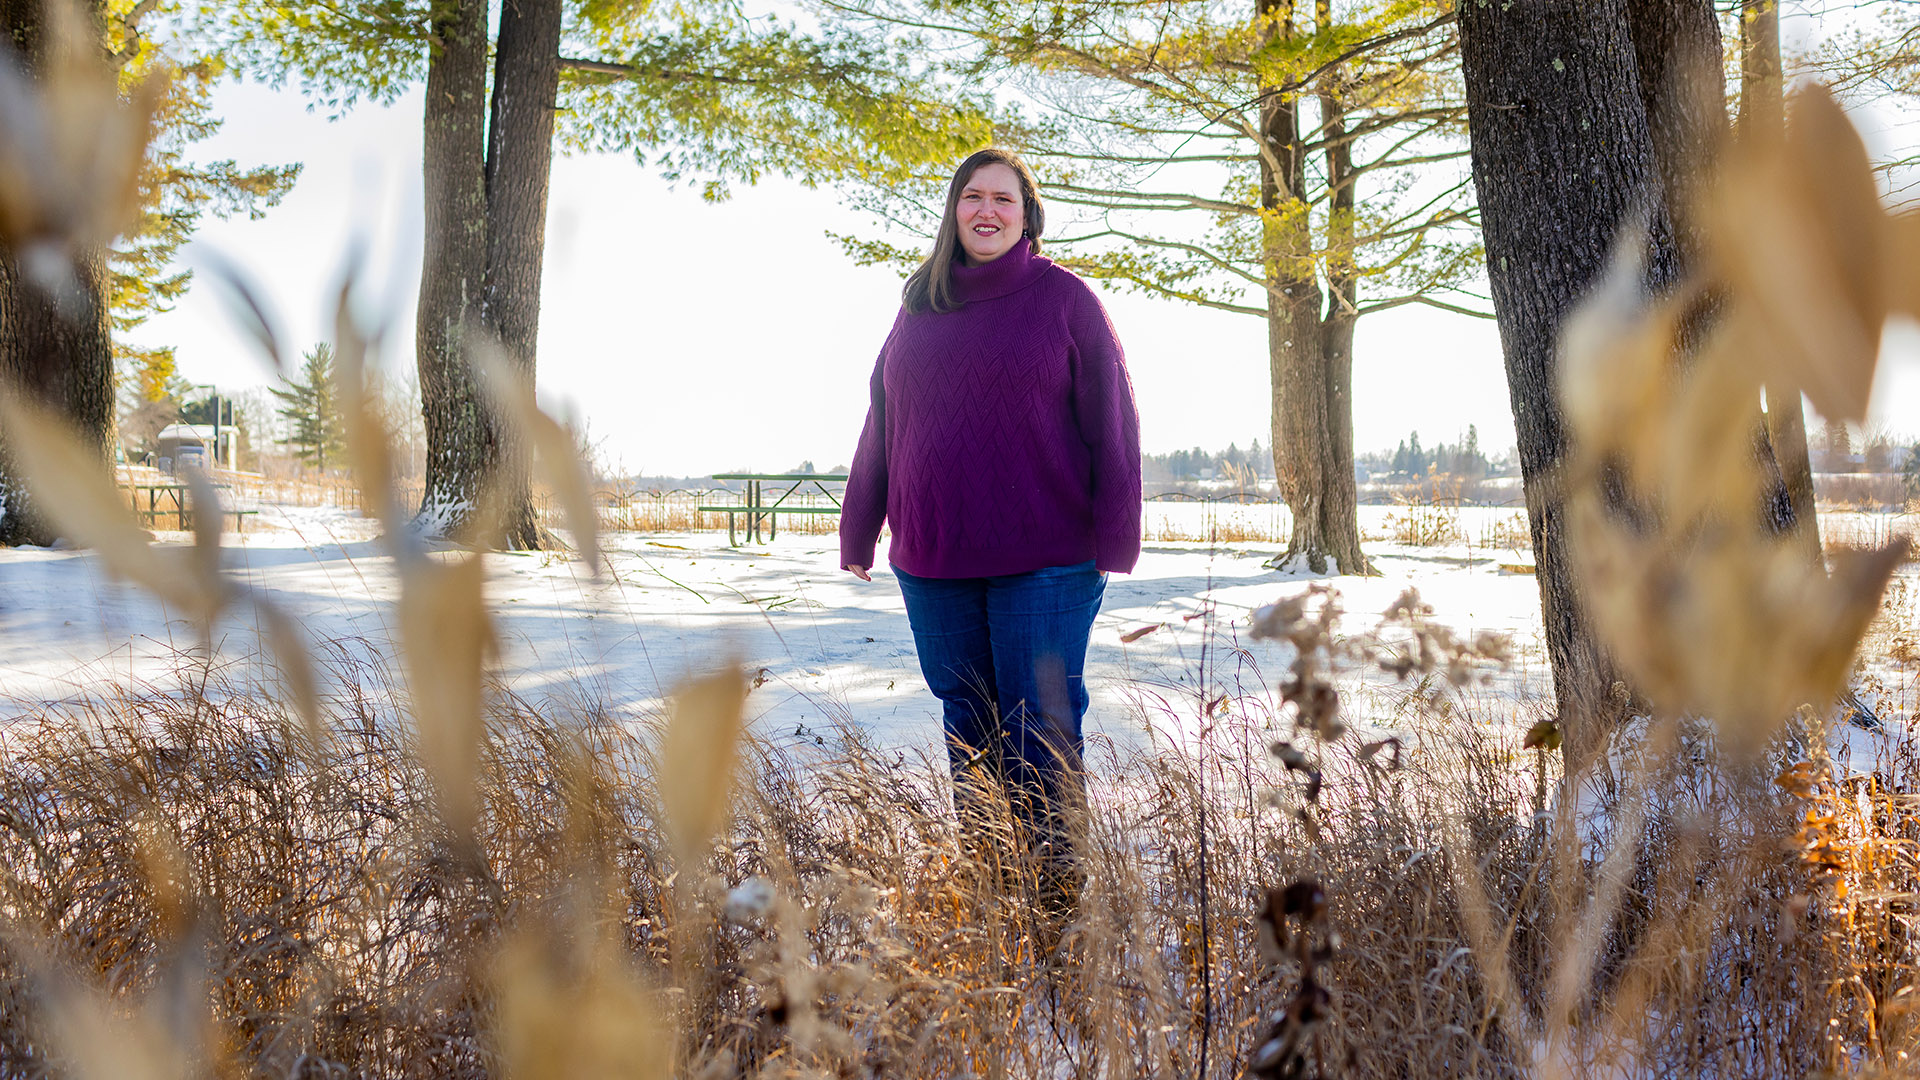 Chrissy Barnard stands outdoors in front of a snow-covered field among multiple trees, with a picnic table in the background and more trees on the horizon.